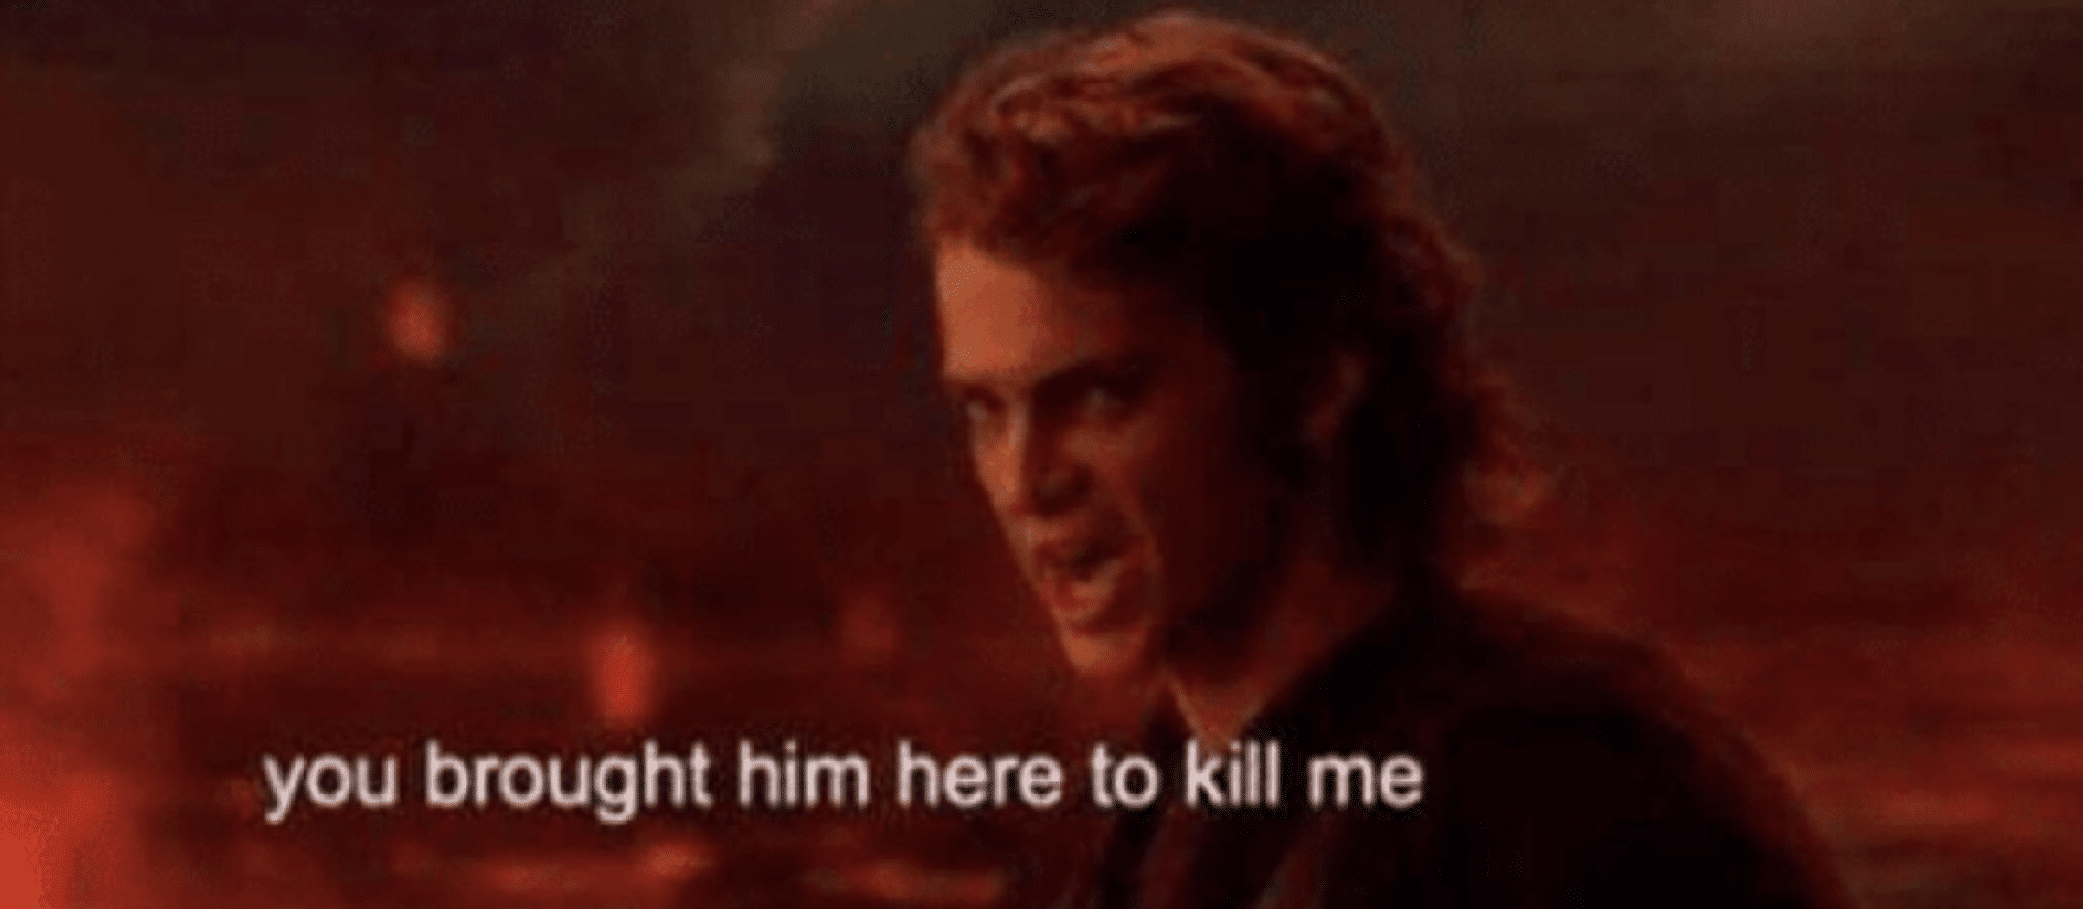 Anakin “You brought him here to kill me!” Prequel meme template blank